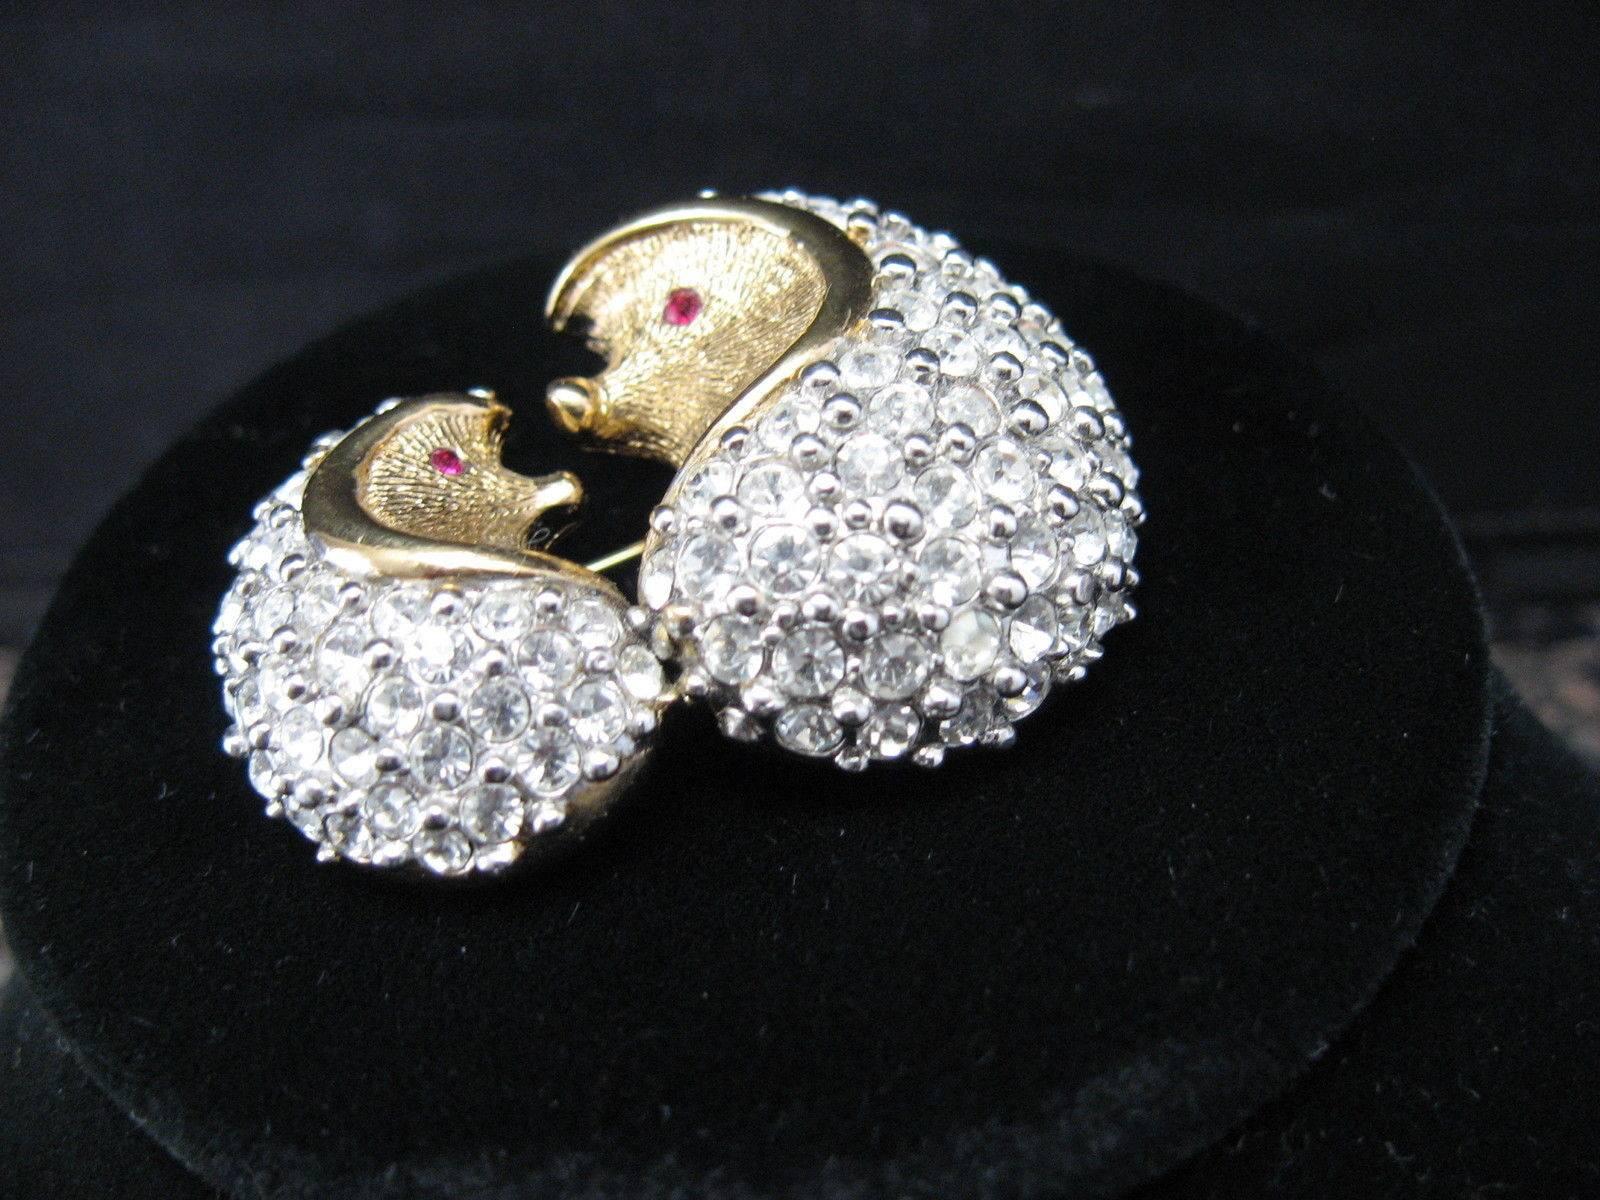 Showcasing a Darling Mama and Baby Hedgehog pin set pave with sparkling Faux Diamond Crystals in a gold tone setting; by Attwood & Sawyer England; Signed A&S; appox. 1.75